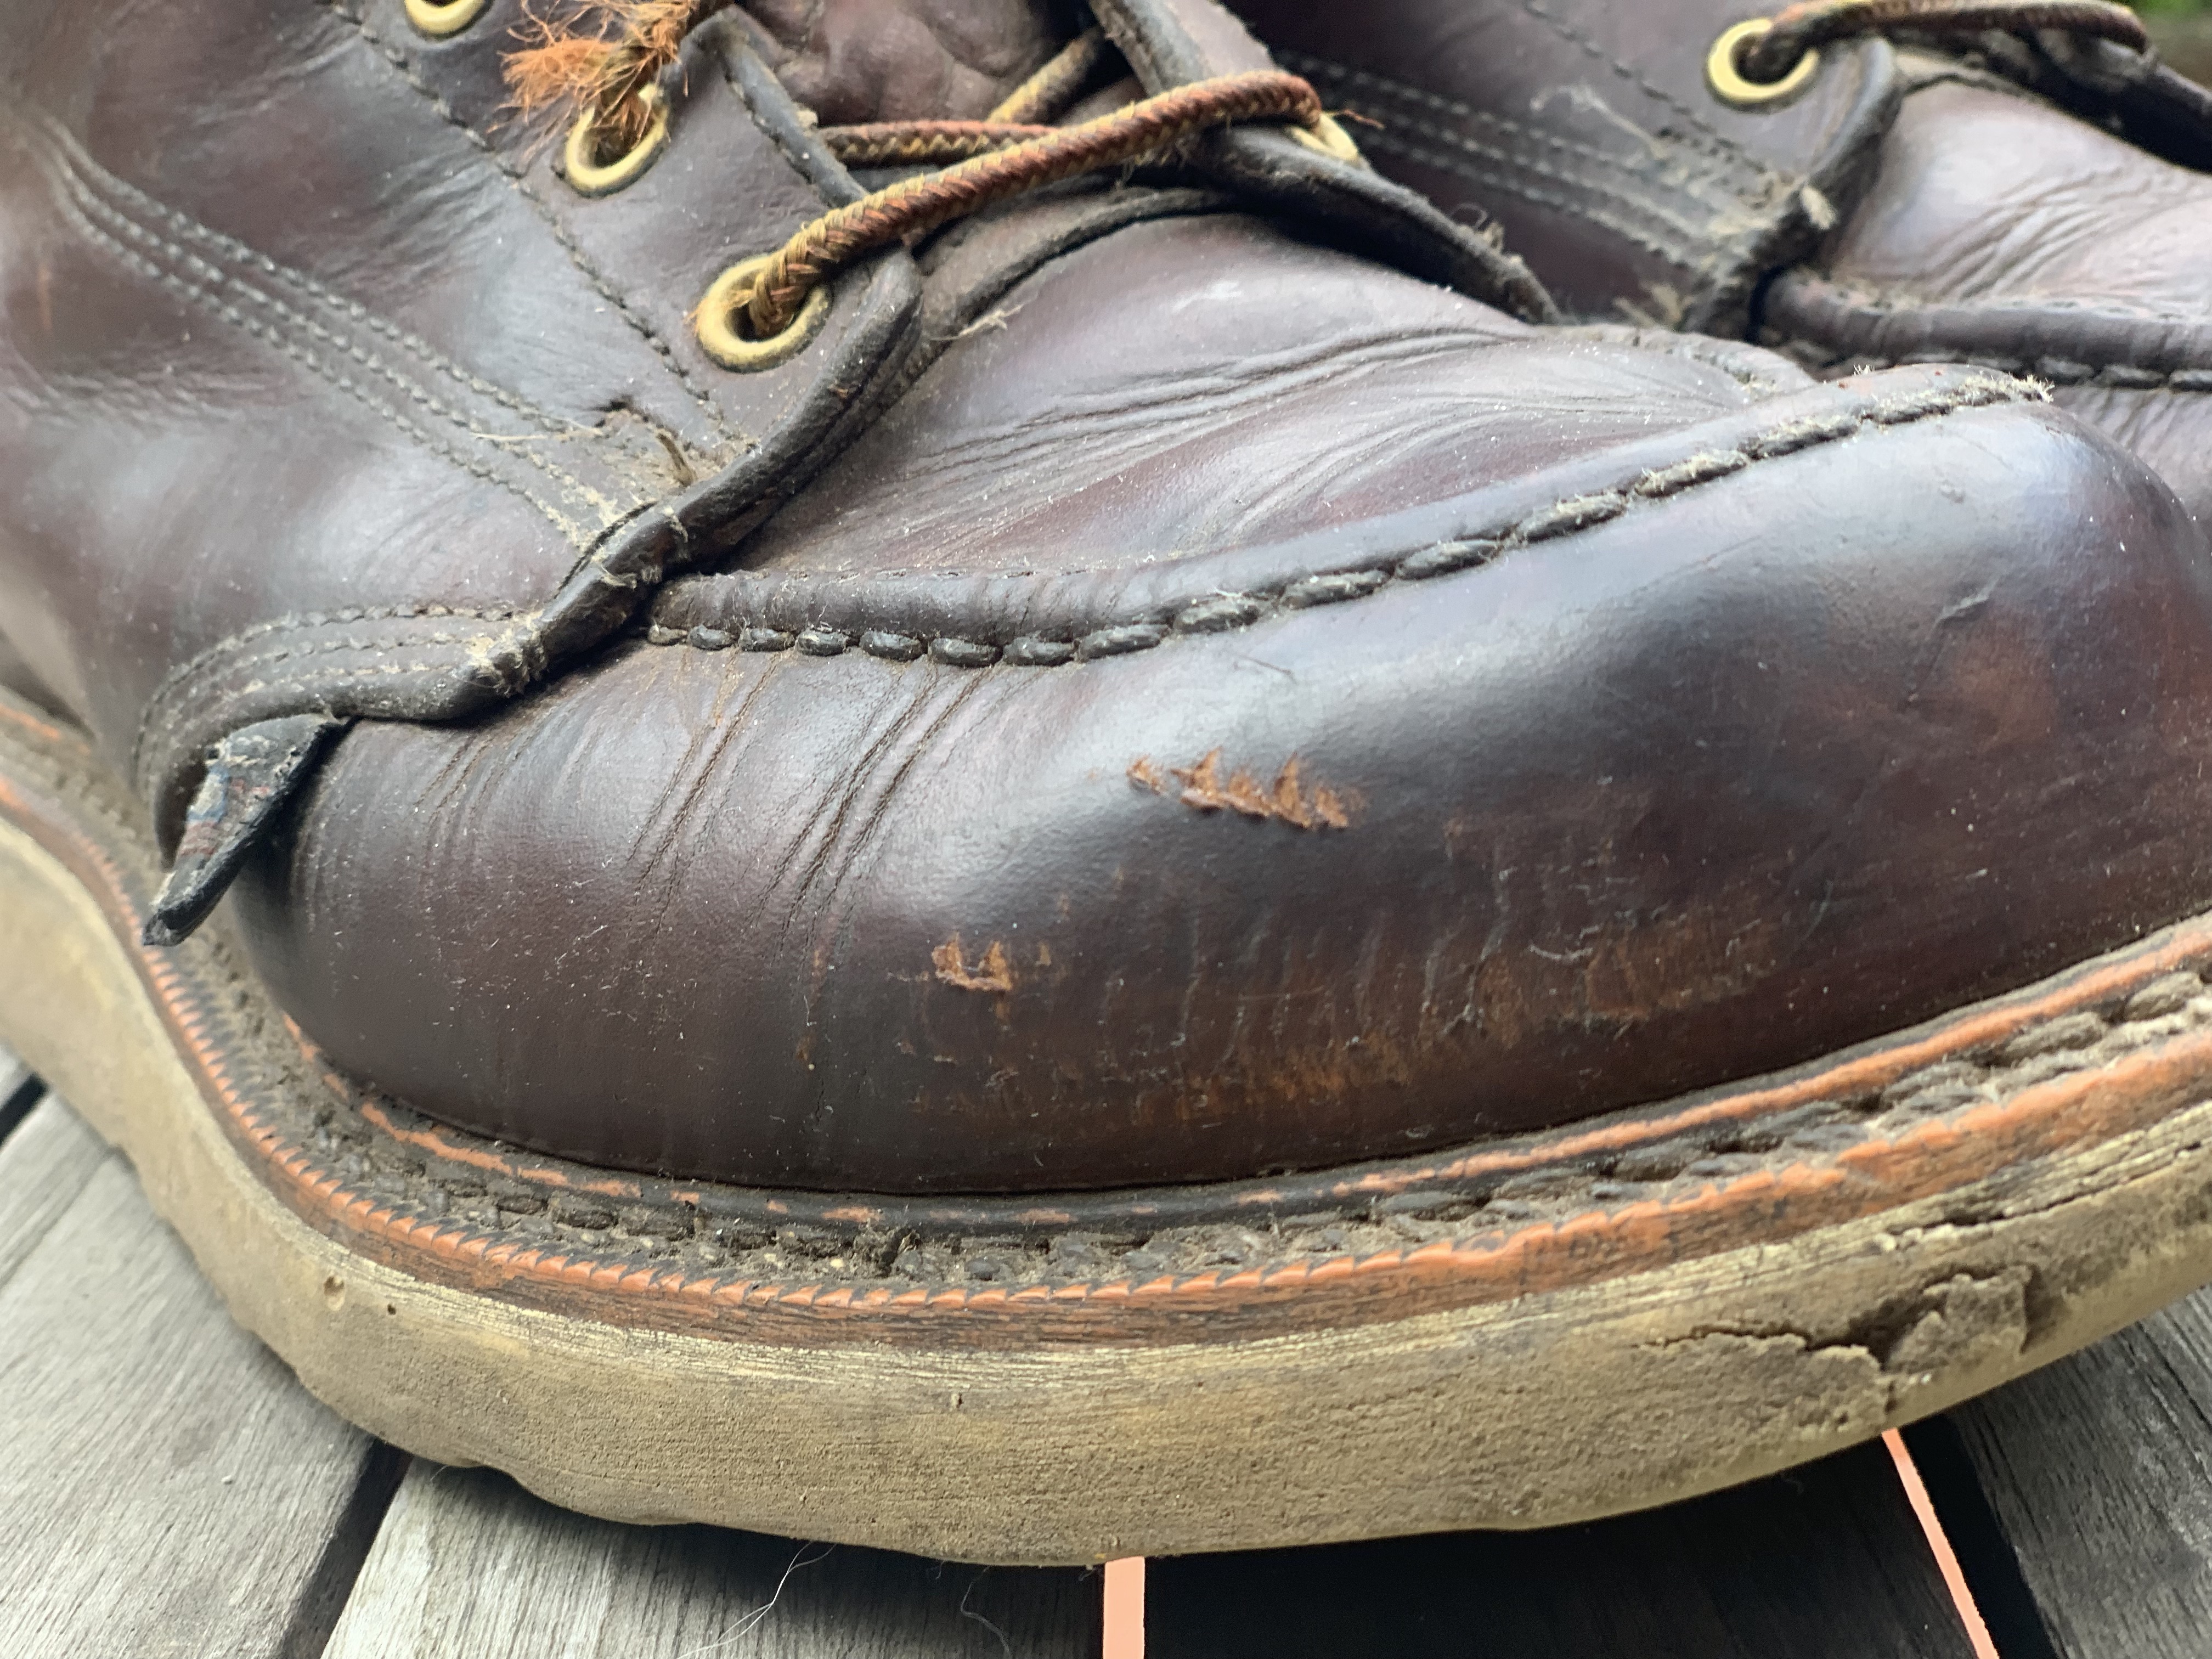 Thorogood Moc Toe Boot Review | Red Wing vs. Thorogood | Stitchdown